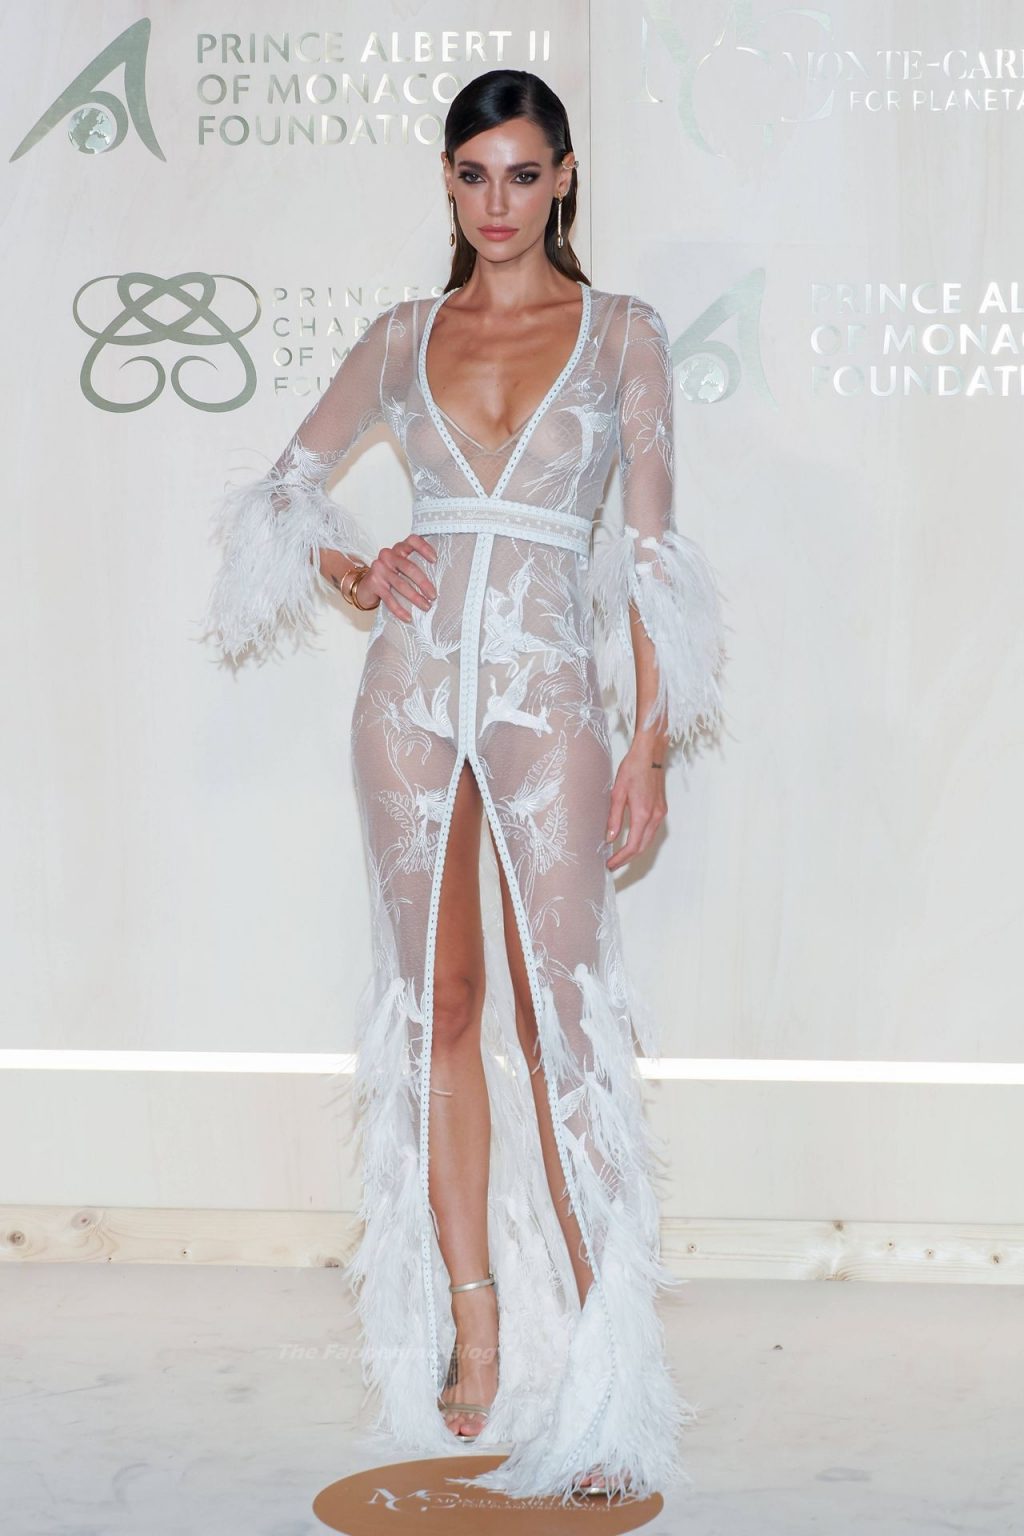 Marianne Fonseca Poses in a See-Through Dress the 2021 Monte-Carlo Gala (5 Photos)